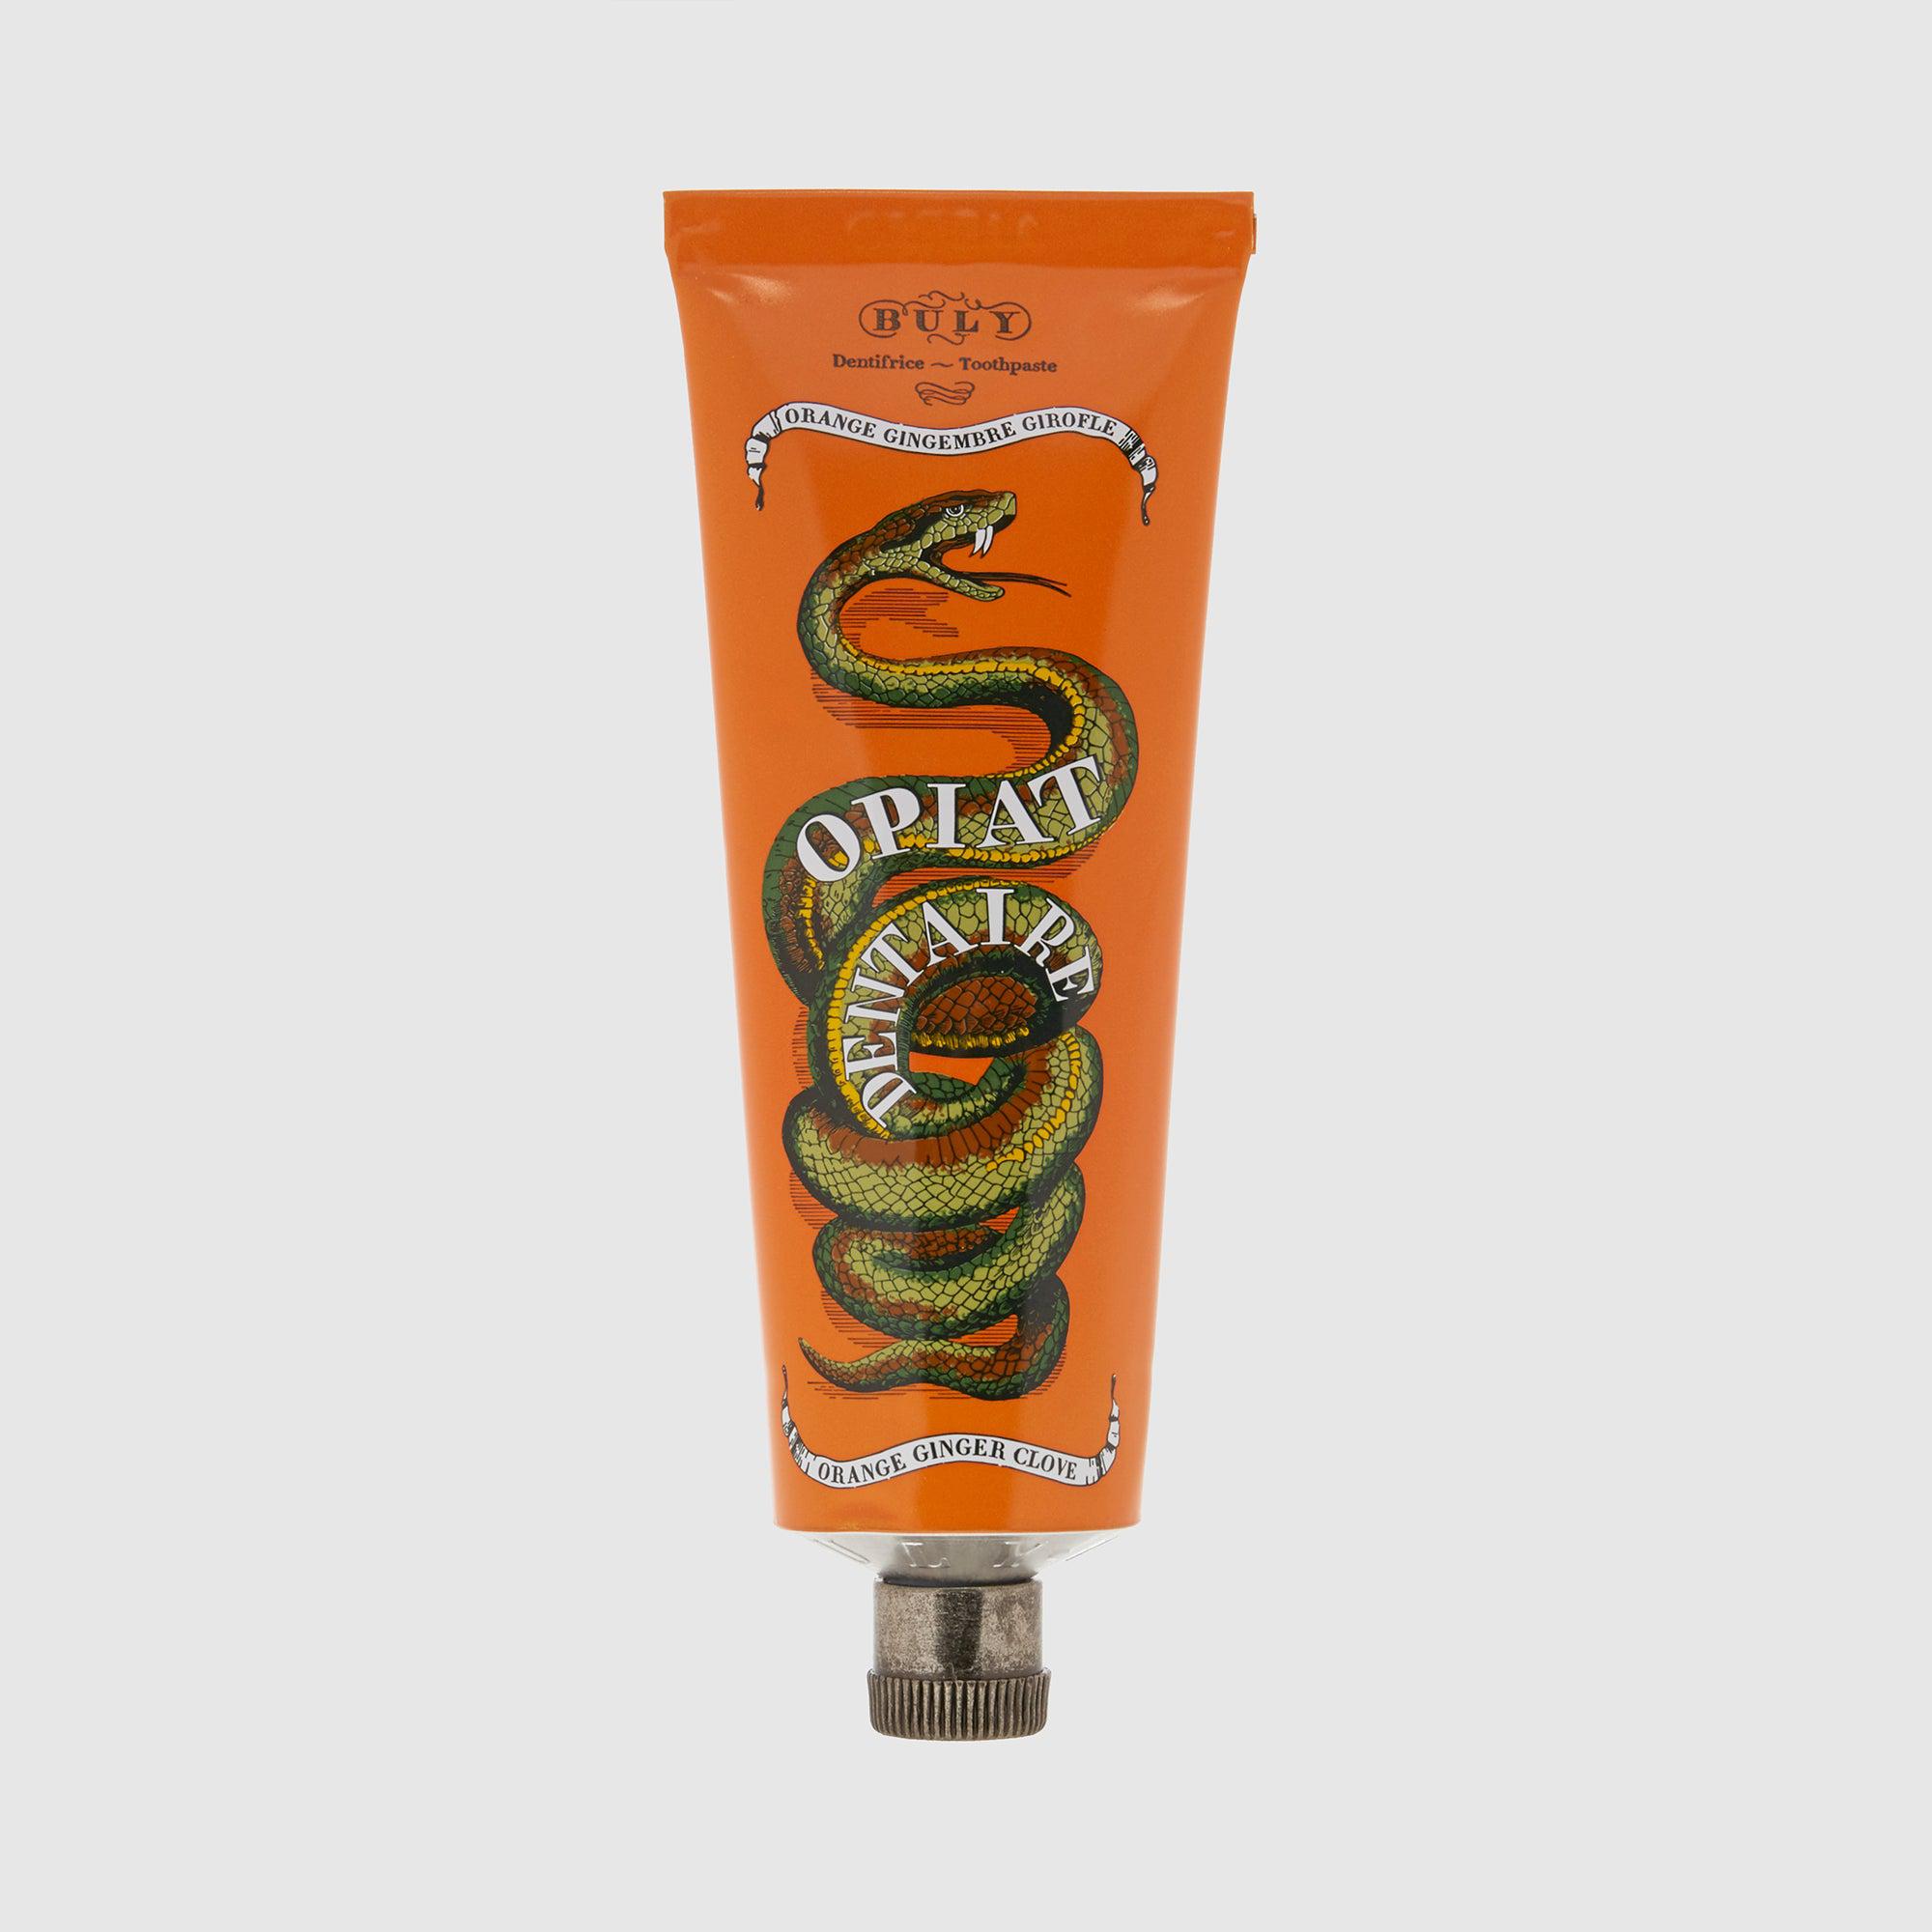 Buly 1803 Opiat Dentaire Orange/Ginger/Clove Toothpaste, 75ml by BULY 1803